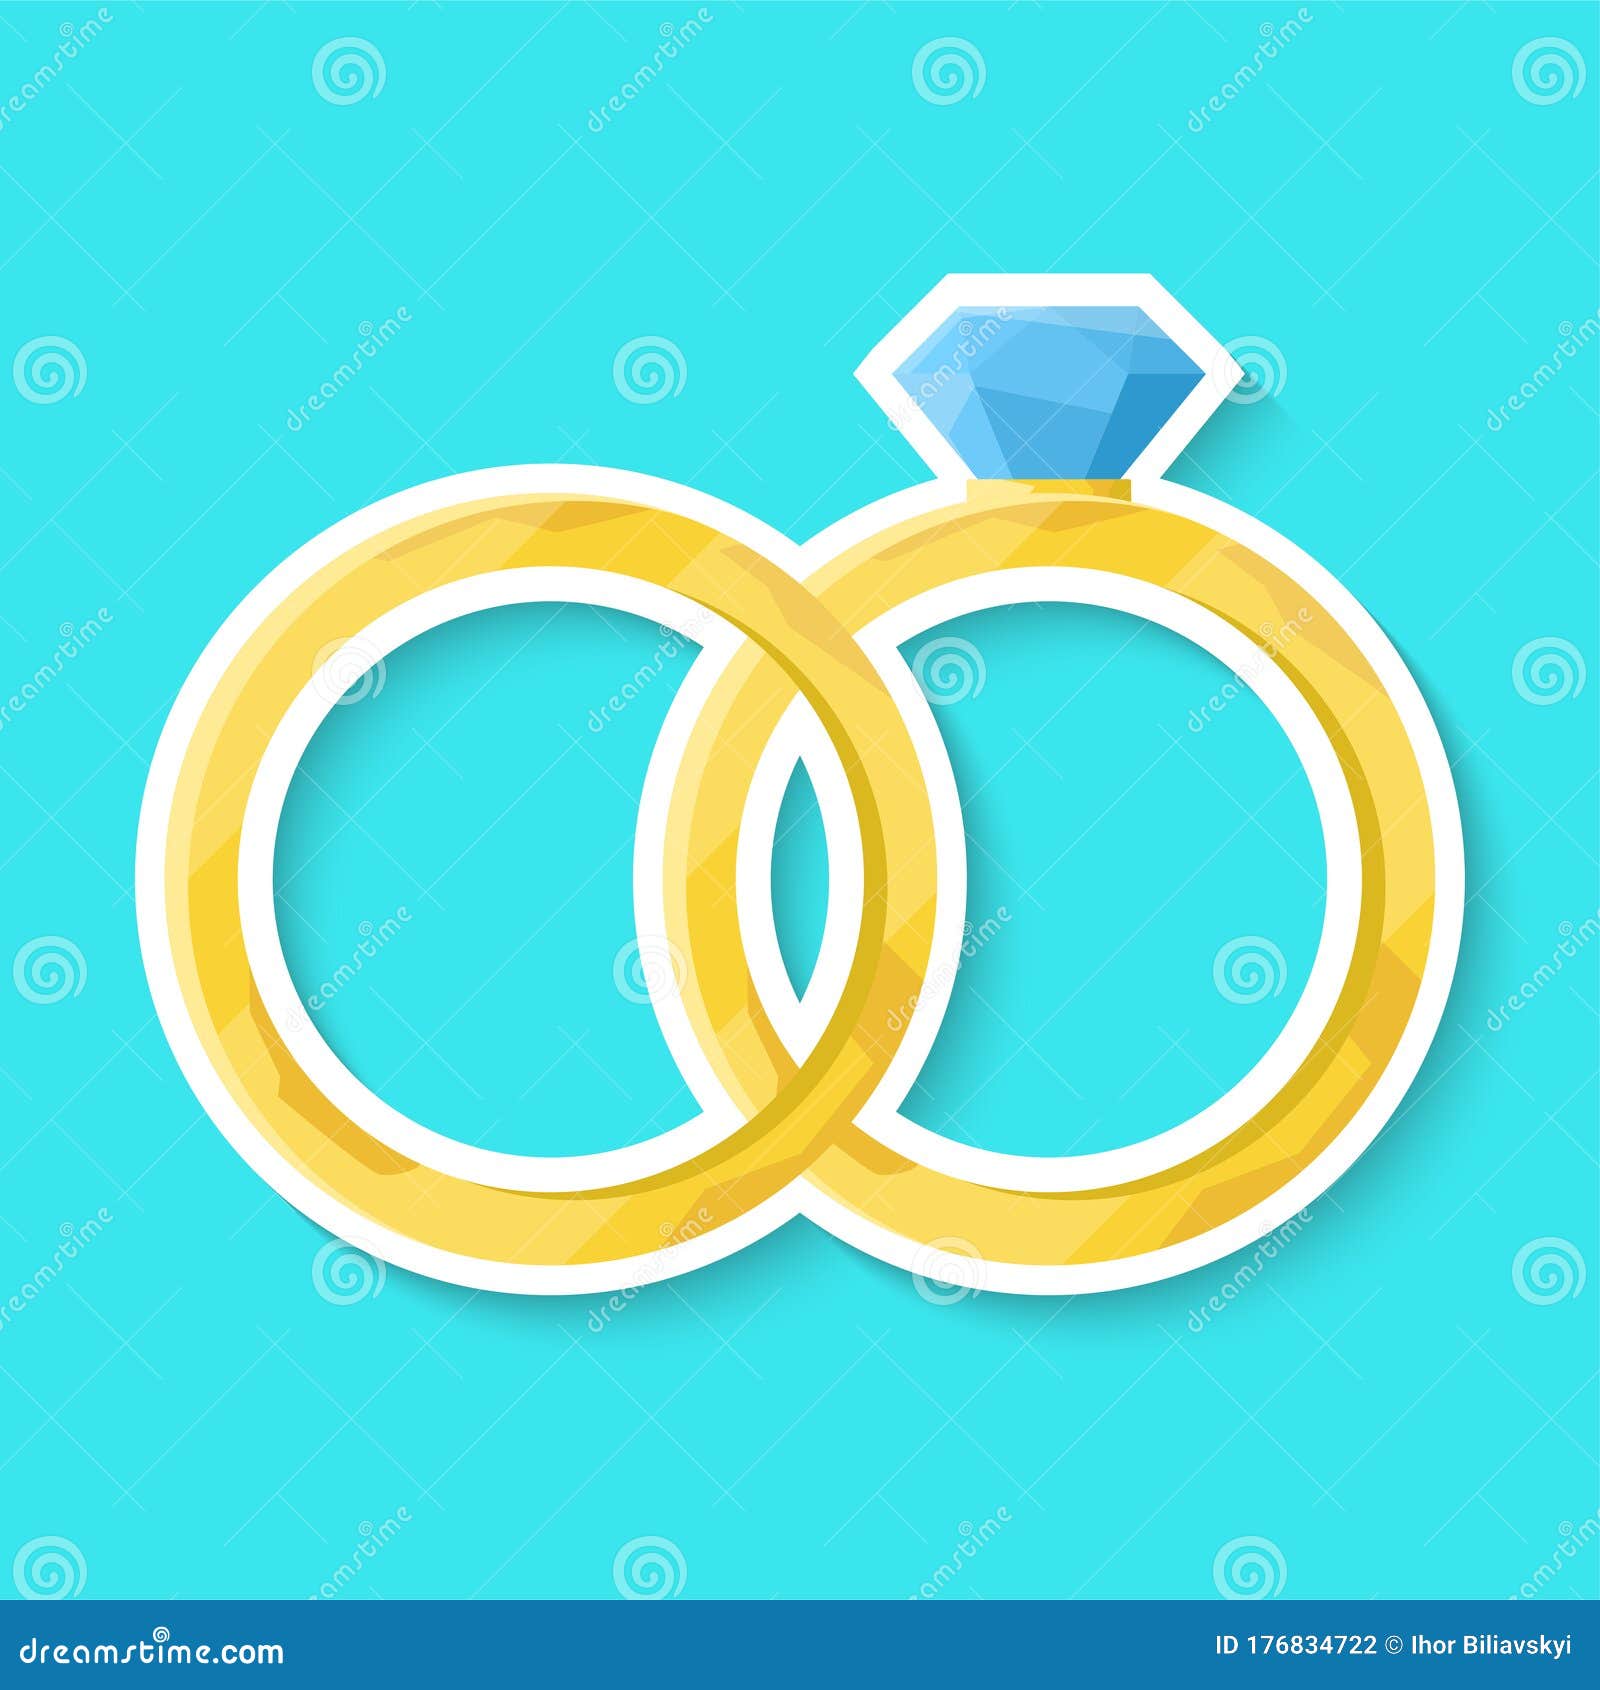 Wedding Ring Isolated On A Blue Background. Golden Ring